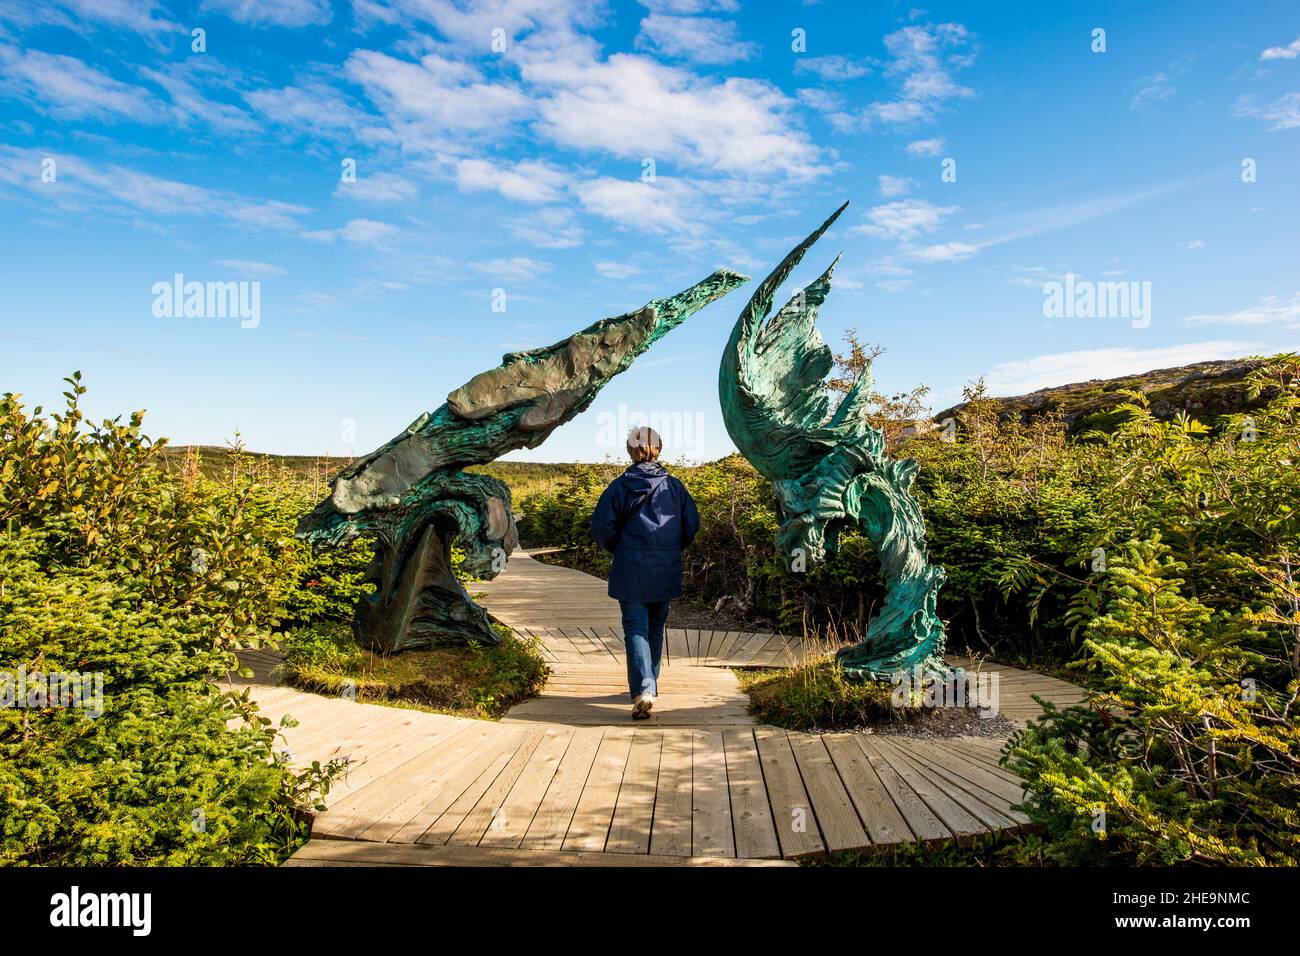 The Meeting of Two Winds sculture at L'Anse aux Meadows National Historic Site, Great Northern Peninsula, Newfoundland, Canada. (MR) Stock Photo